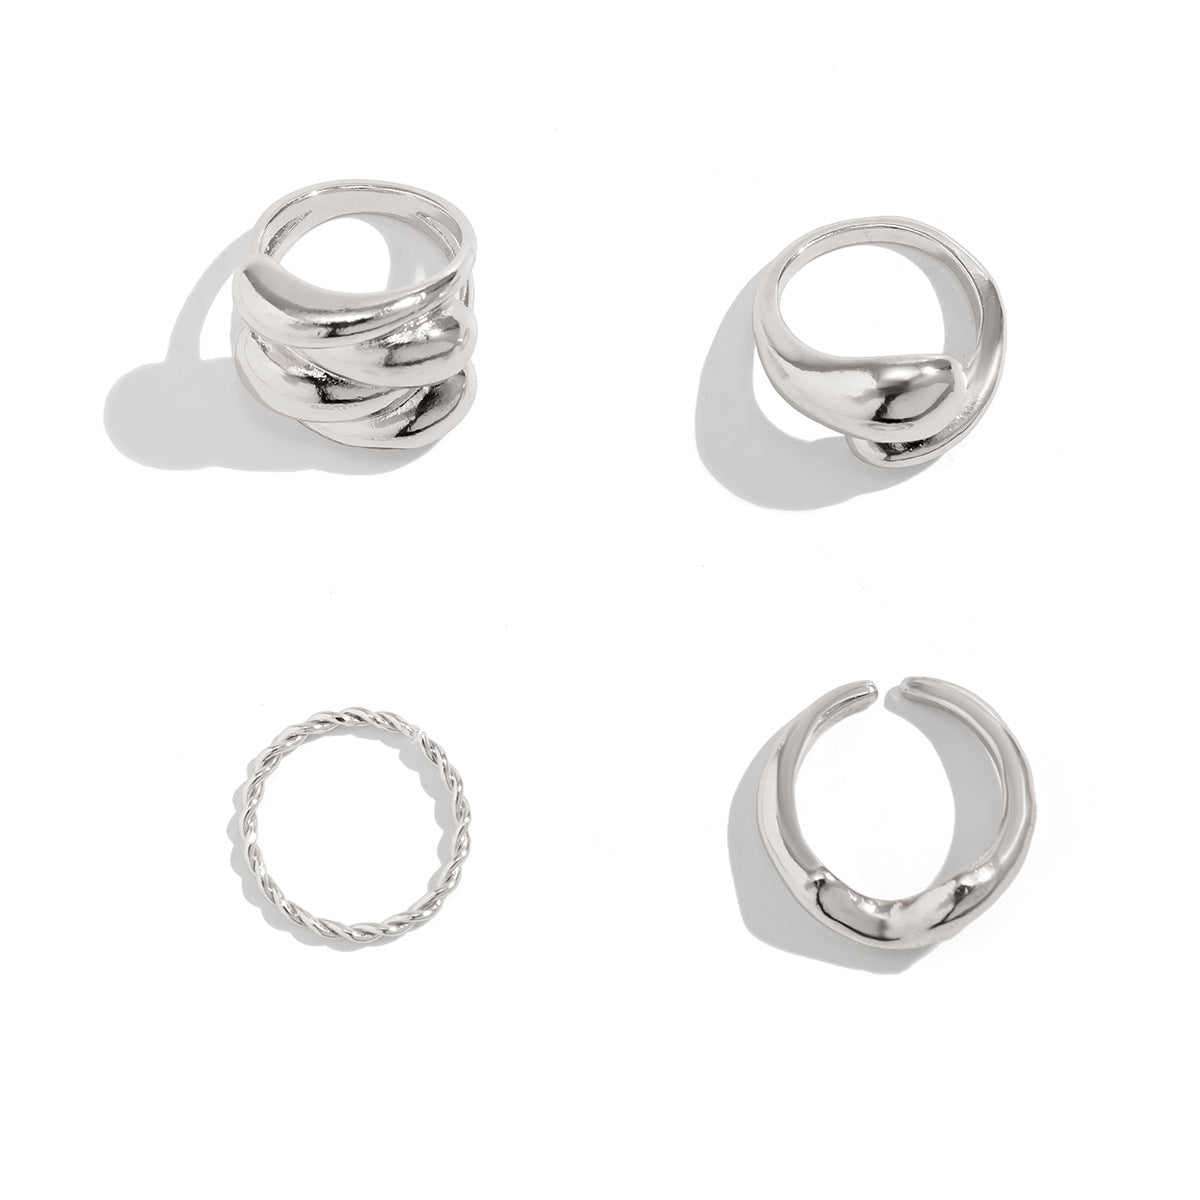 European and American Fusion Jewelry Collection, Unique Style, Chic Design, Curved Geometric Rings, Interlocking Bands, Bold Statement Ring Set